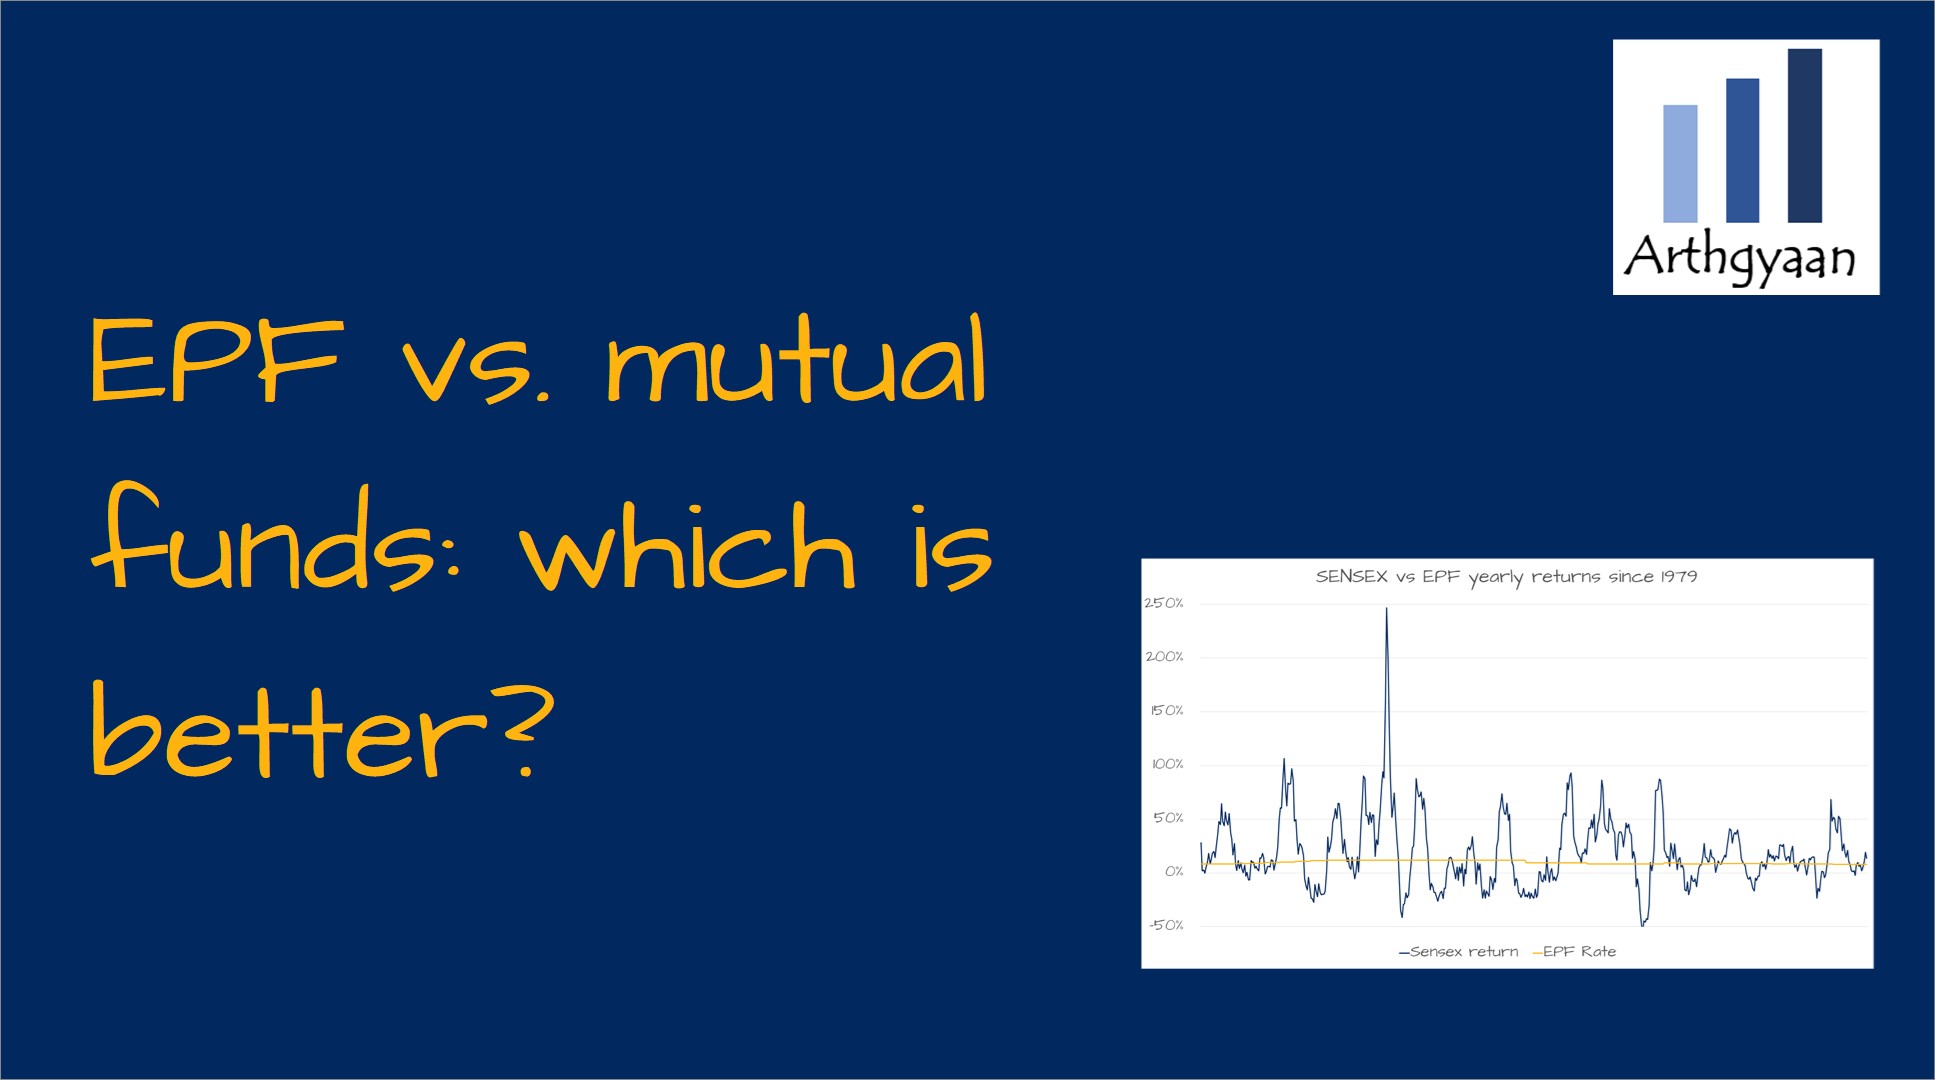 EPF vs. mutual funds: which is better?